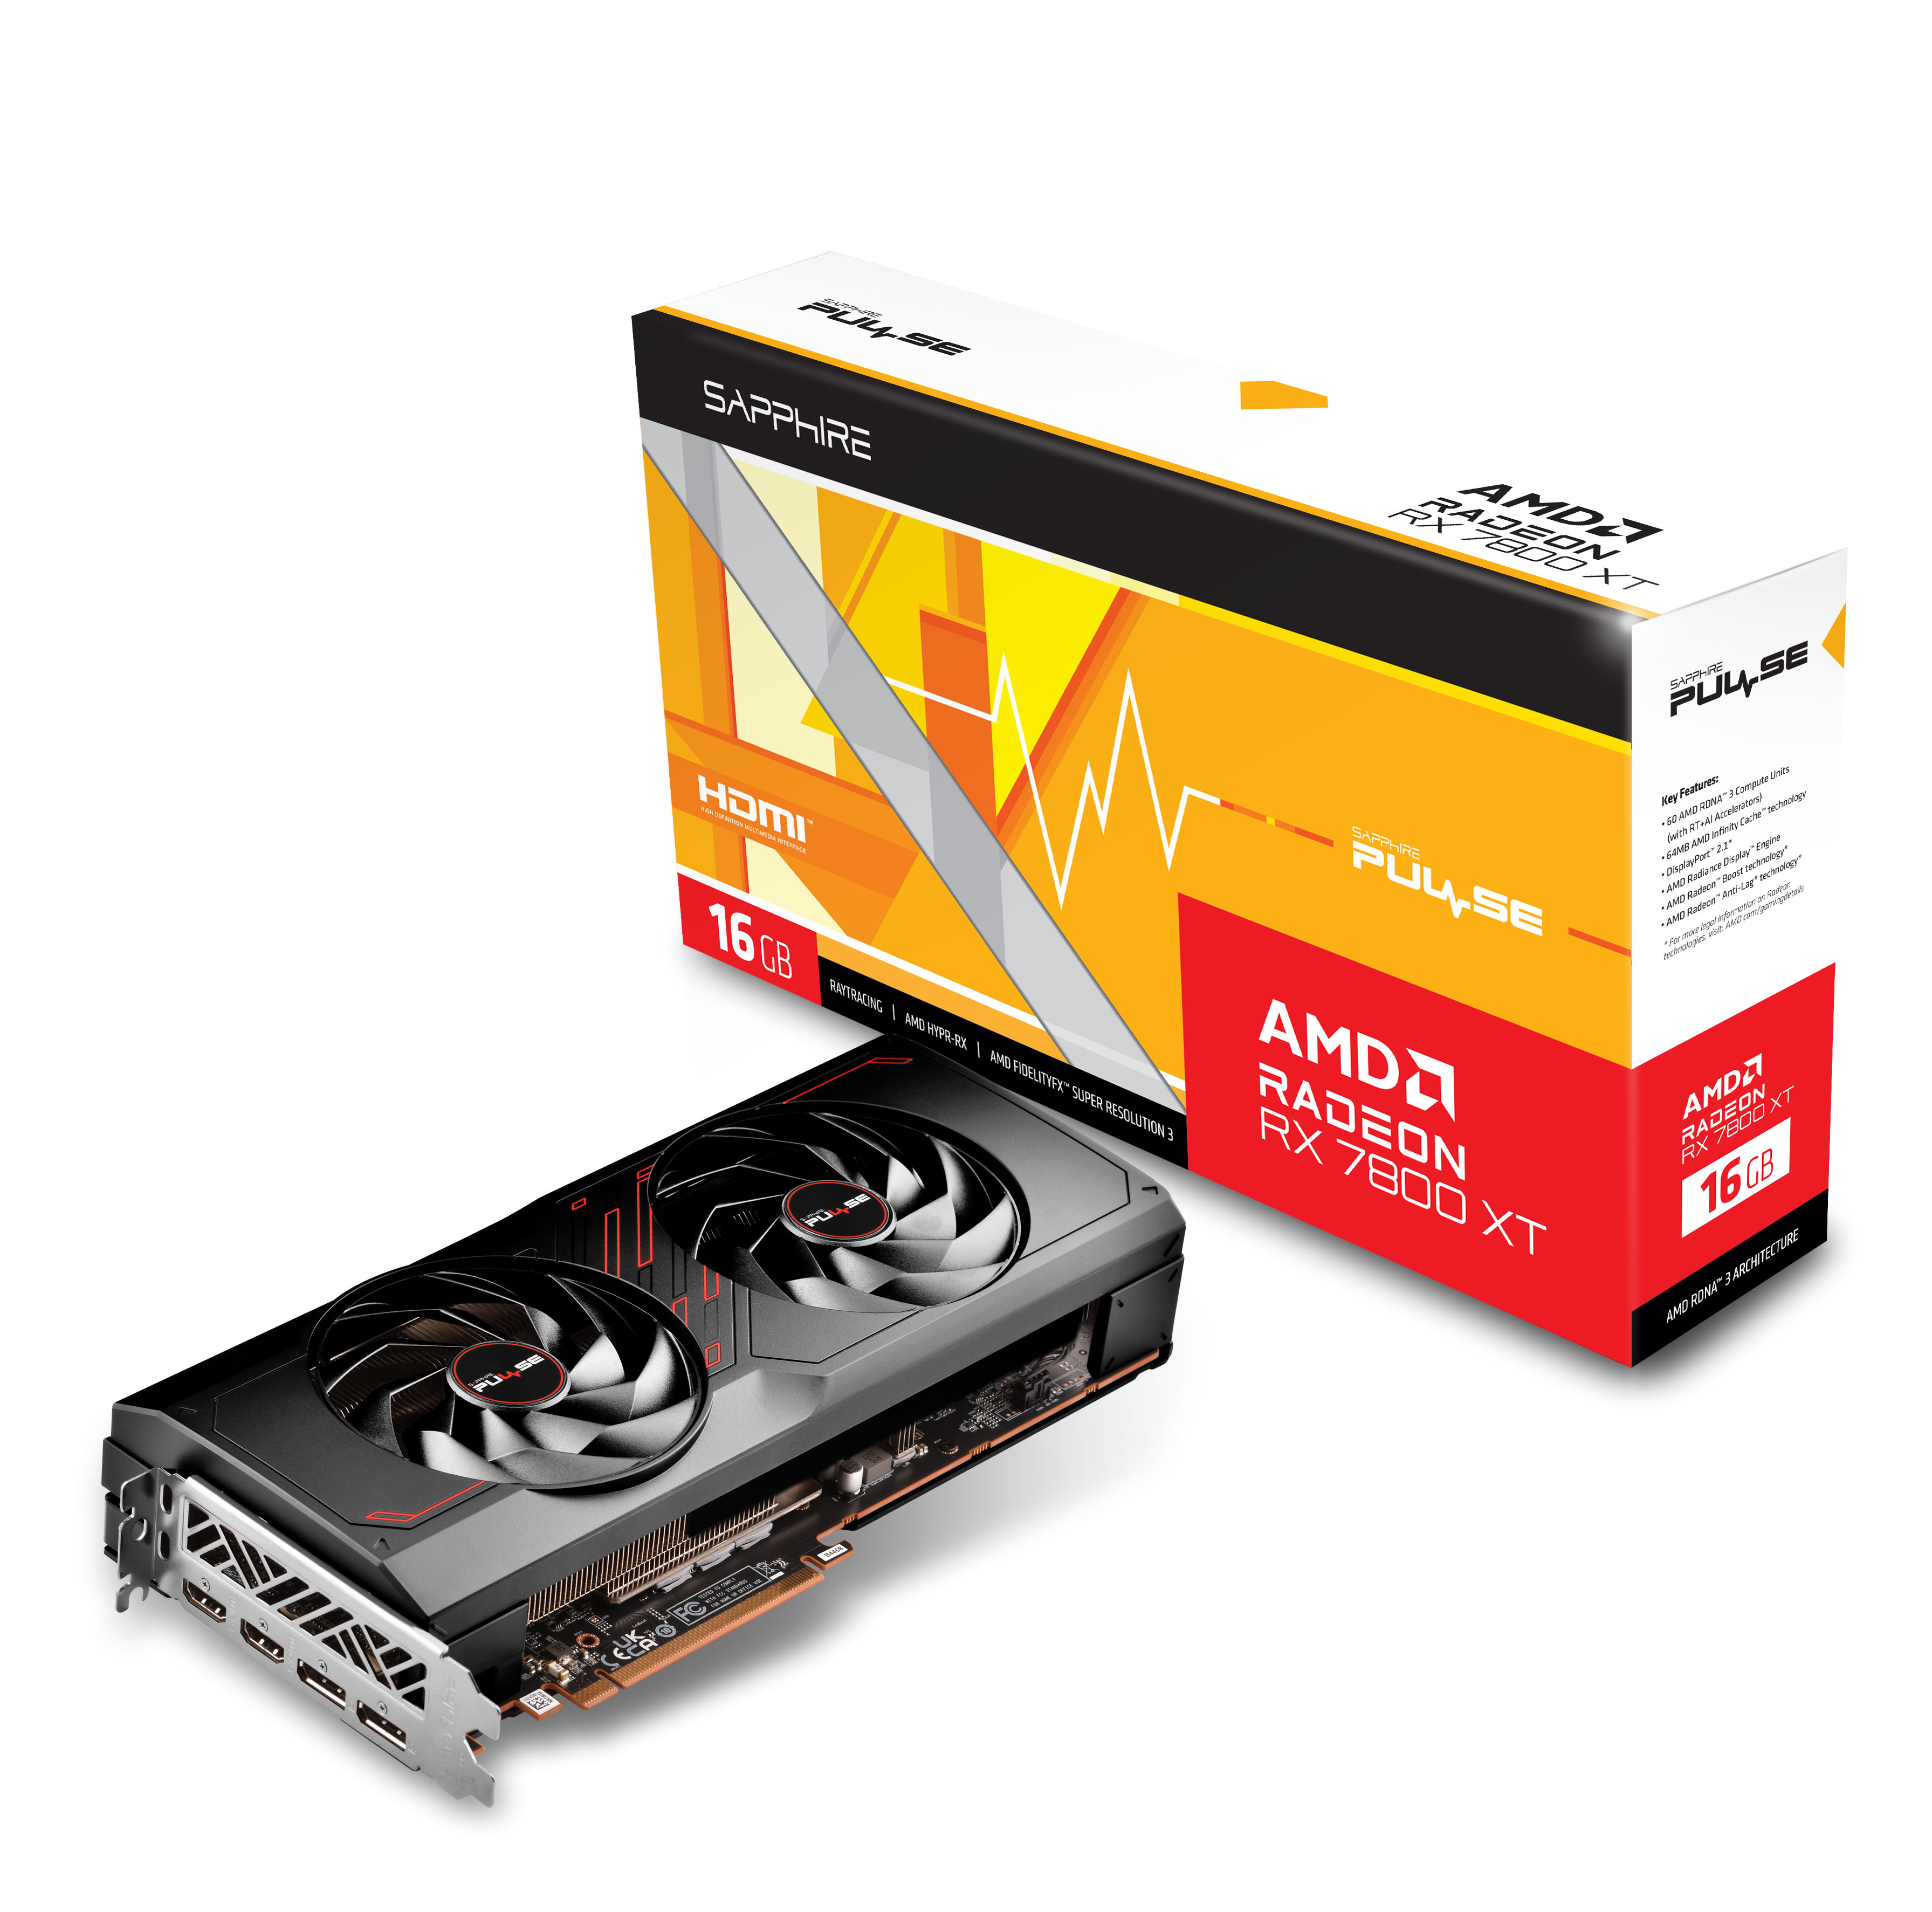  - SAPPHIRE PULSE AMD Radeon™ RX 7800 XT Gaming Graphics Card with 16GB GDDR6, AMD RDNA™ 3 architecture